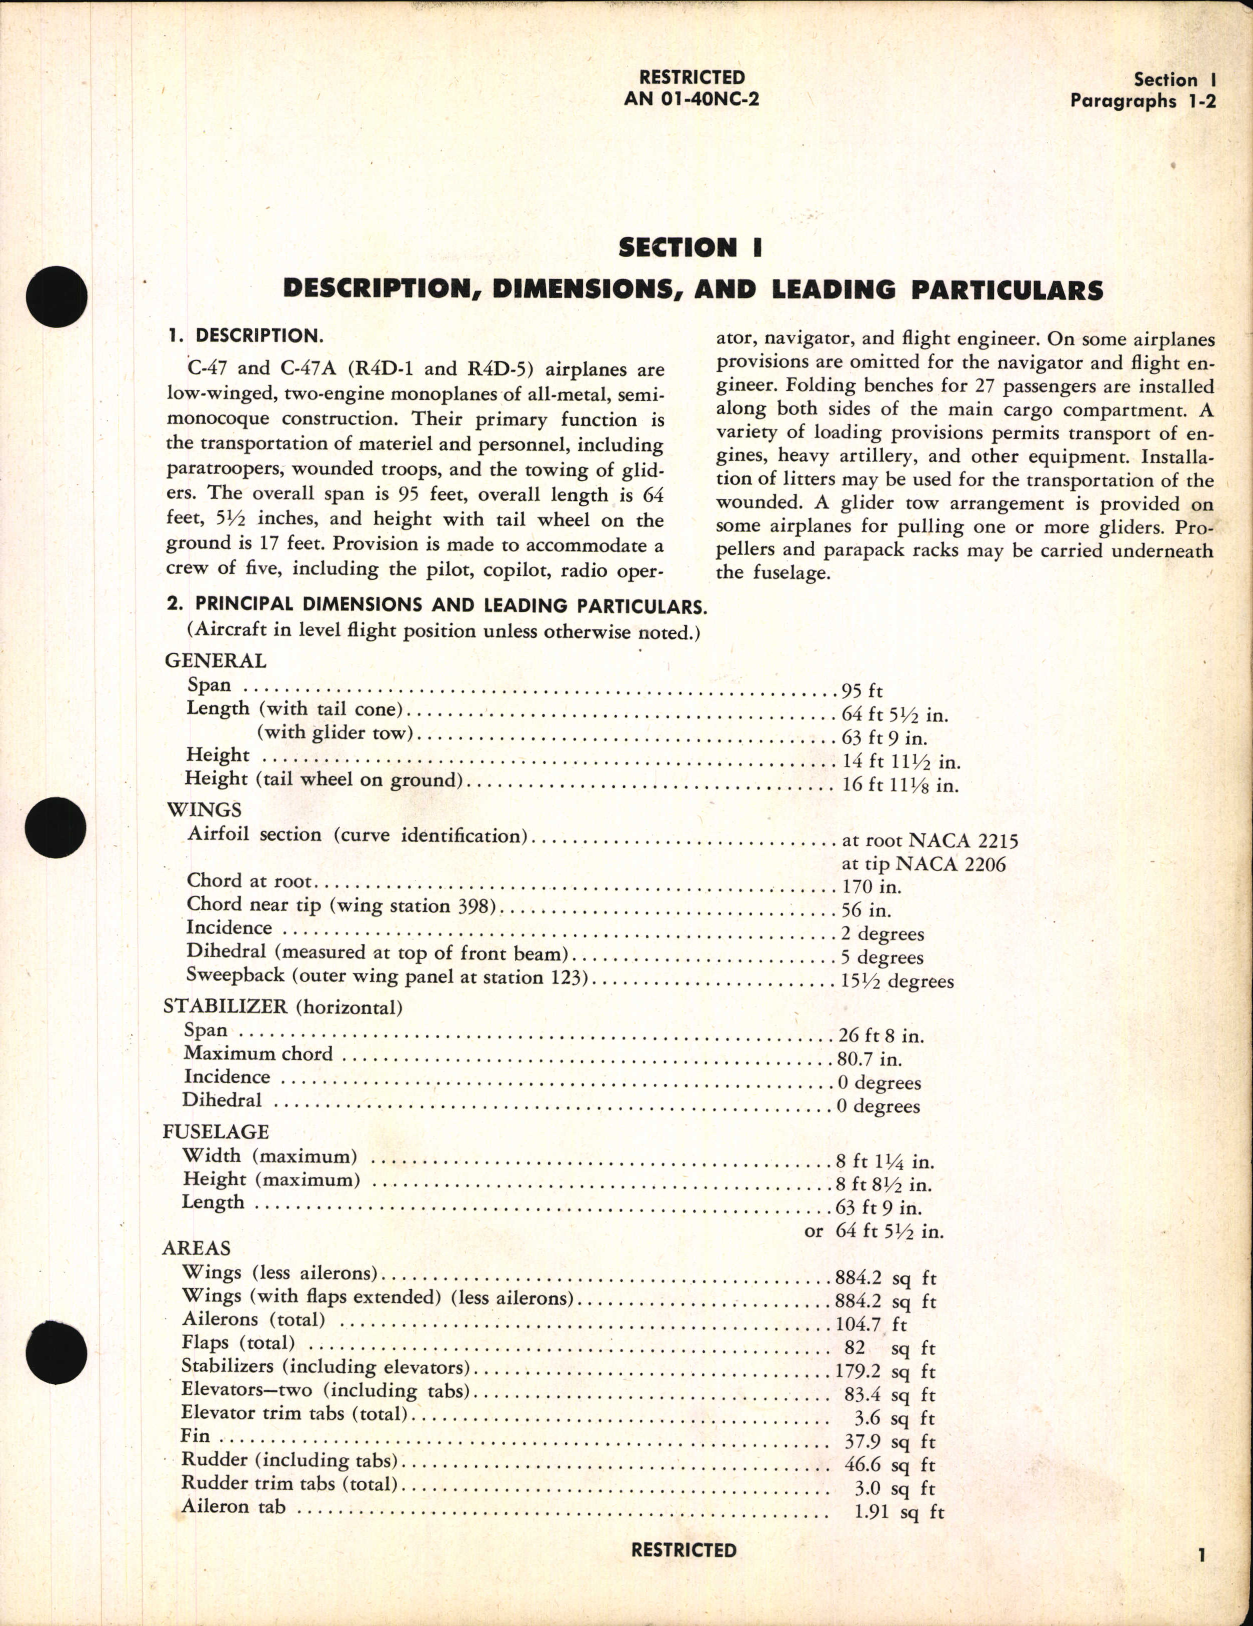 Sample page 7 from AirCorps Library document: Erection and Maintenance for C-47, C-47A, R4D-1, and R4D-5